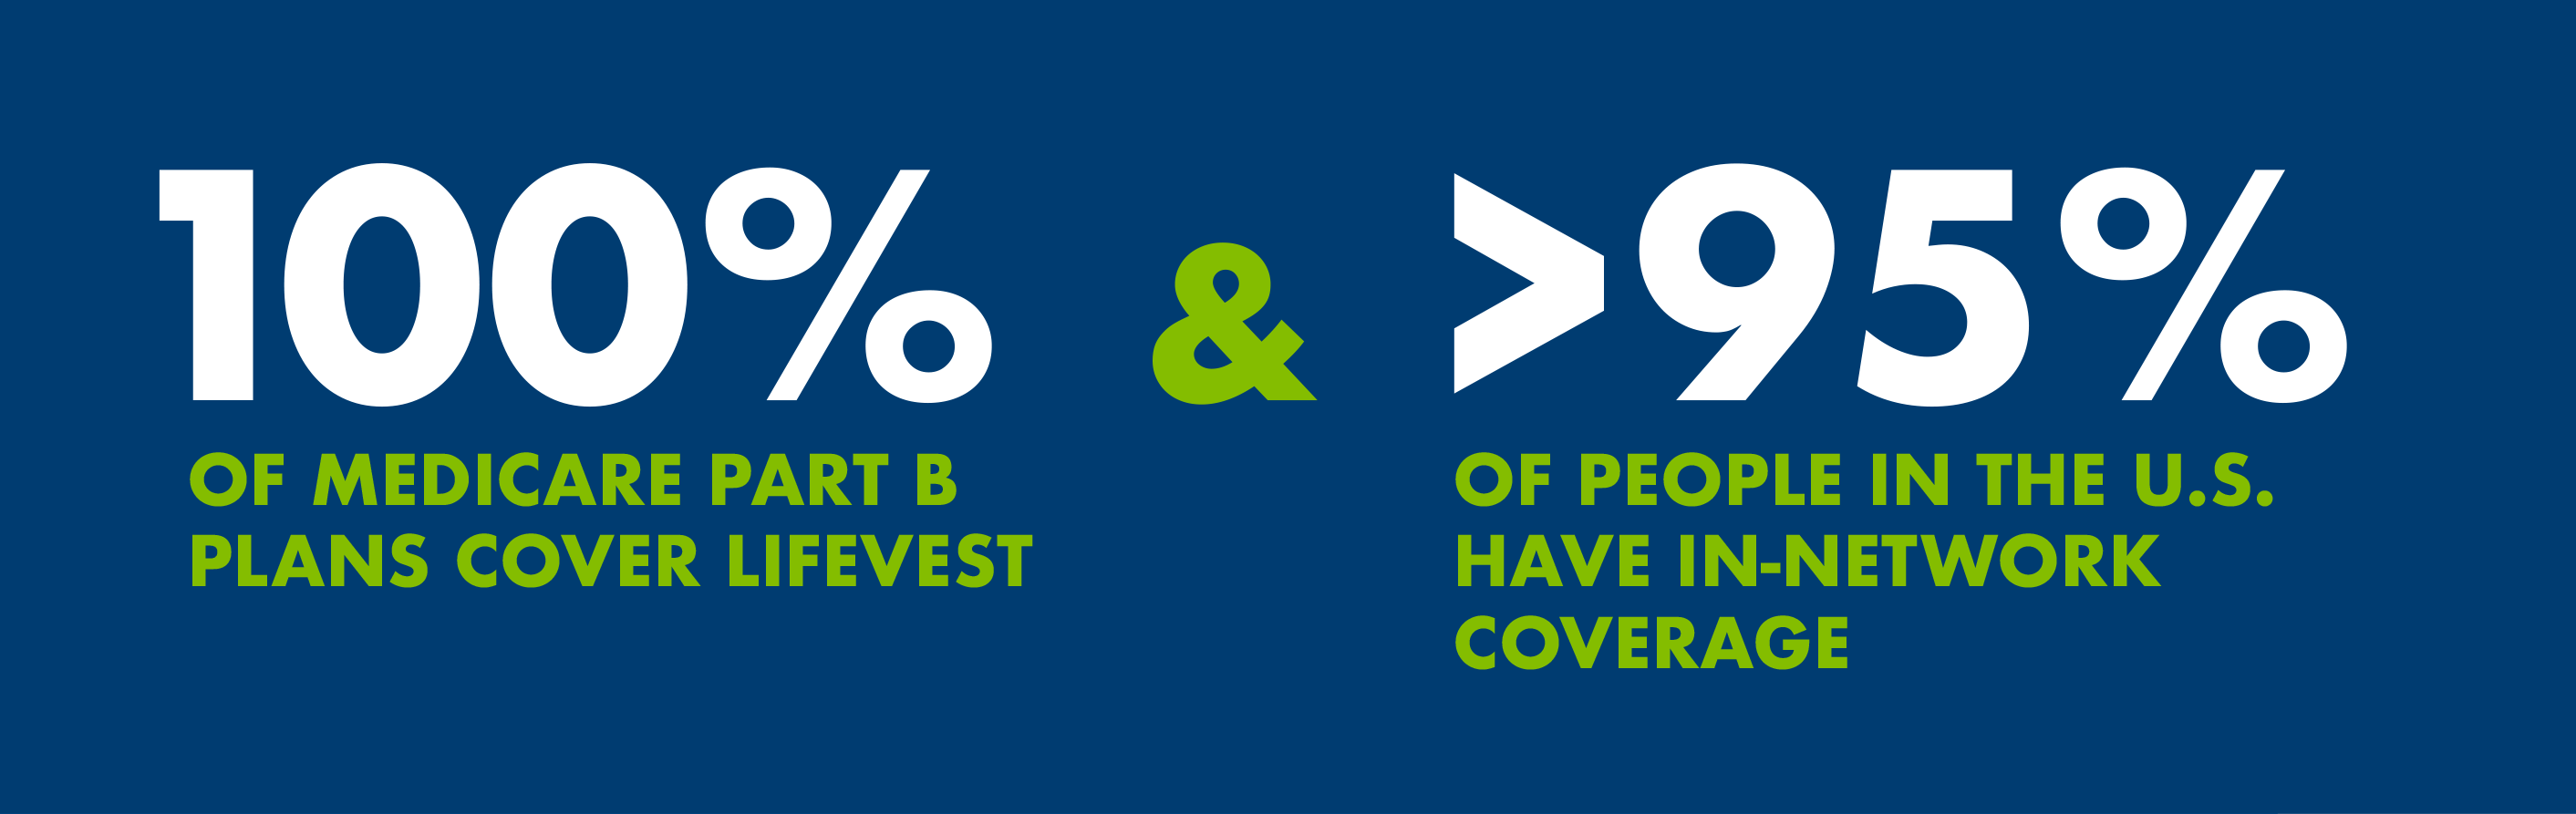 100% of Medicare Part B plans cover LifeVest & > 95% of people in the US have in-network coverage